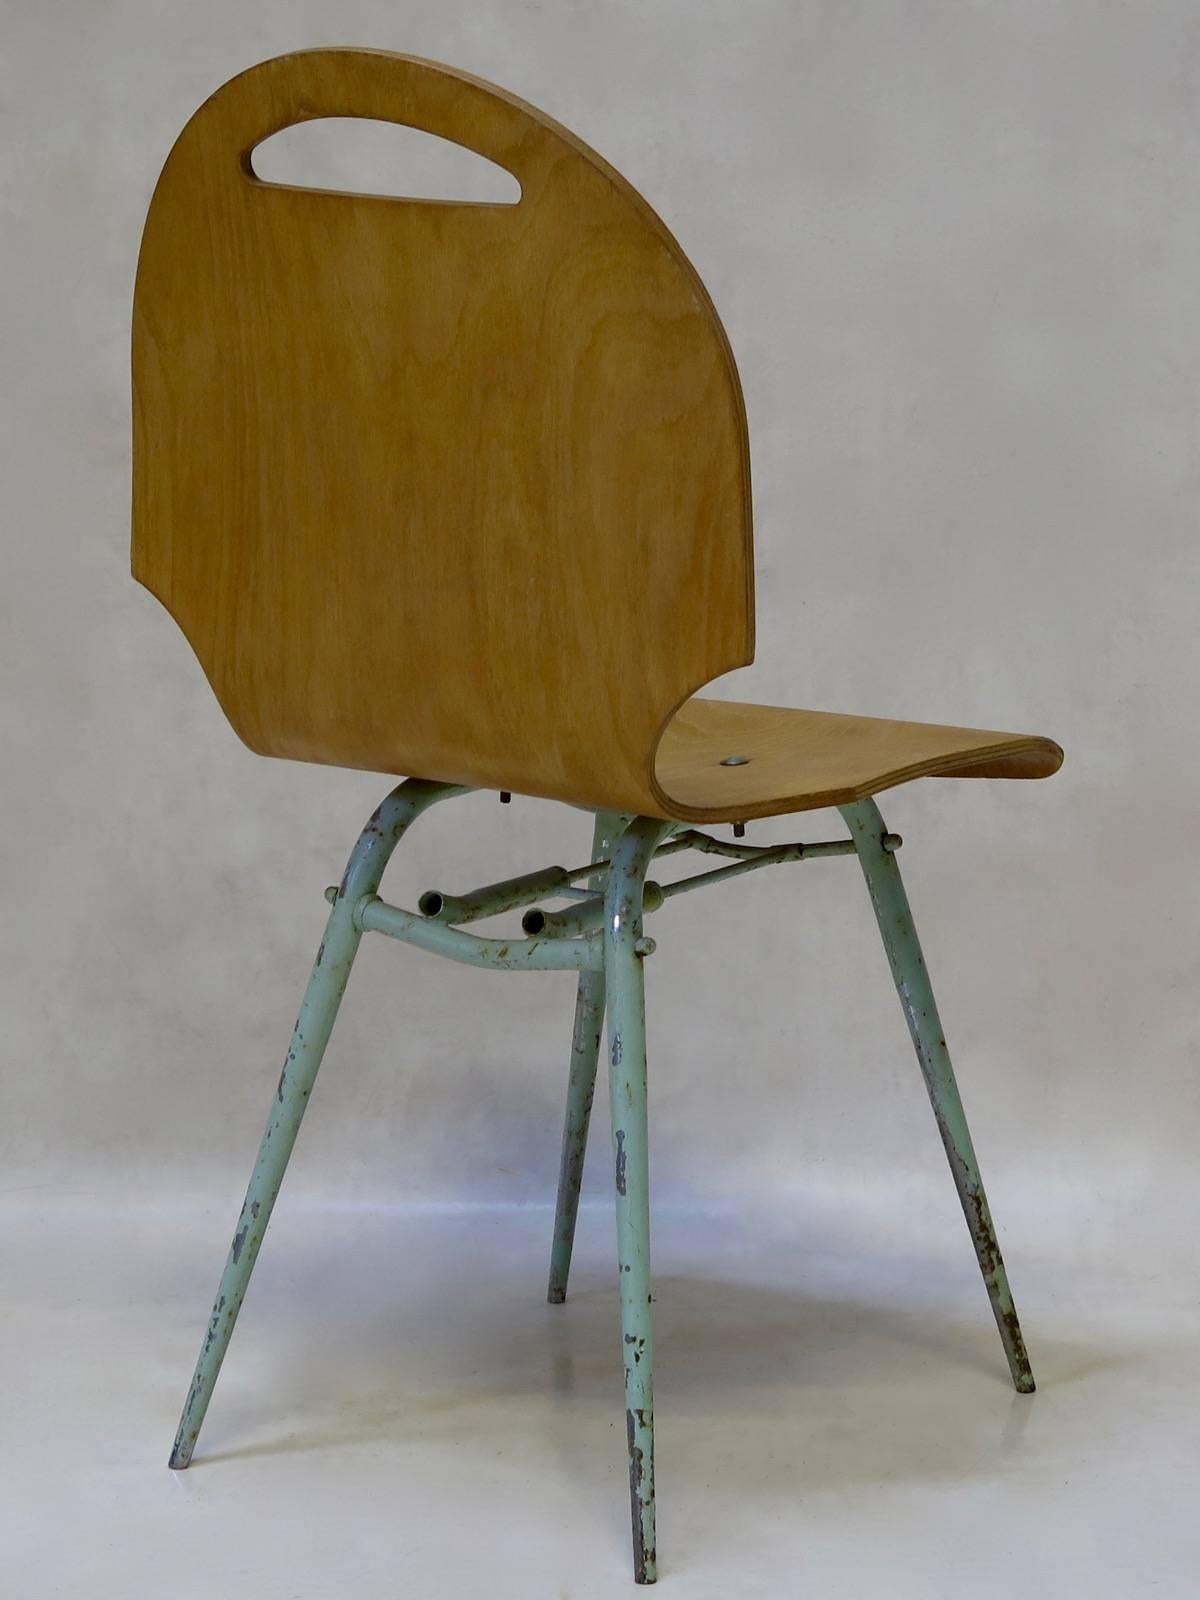 plywood chairs for sale